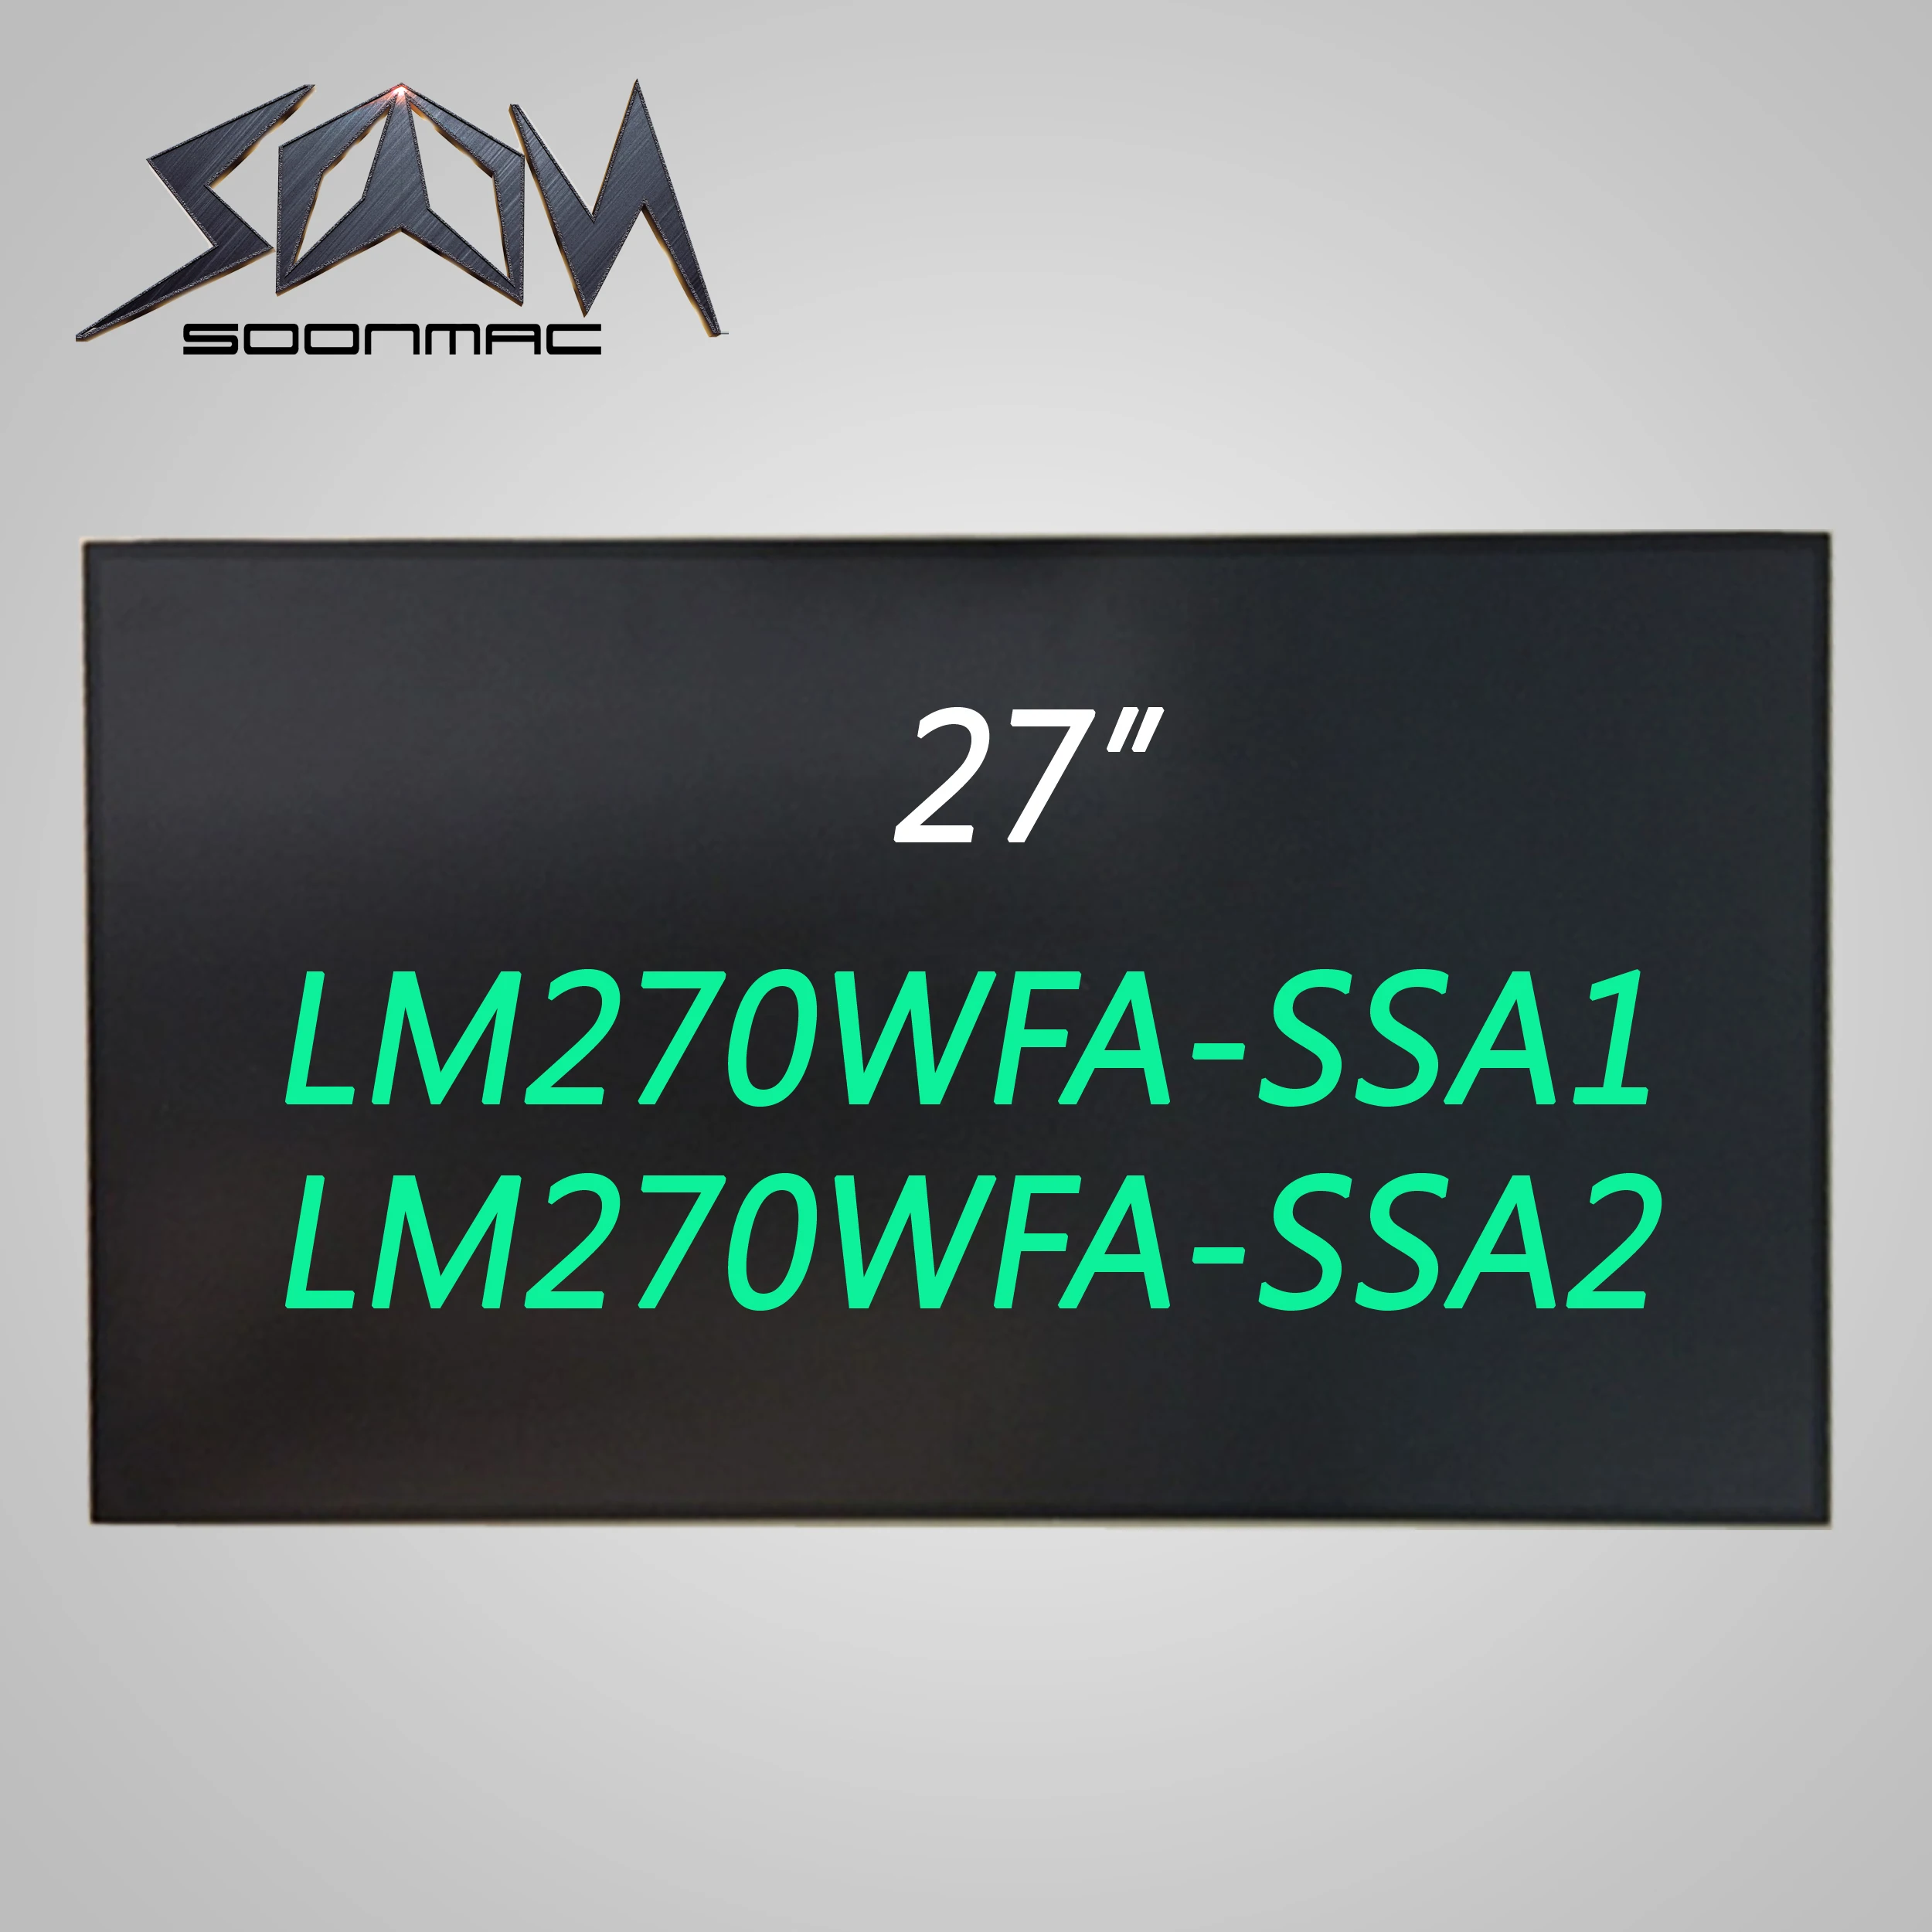 

New 27 Inches Touch LCD Screen LM270WFA-SSA1 LM270WFA-SSA2 LM270WFA SSA1 SSA2 SS A1 A2 Touch LCD Display for ALL-IN-ONE PC